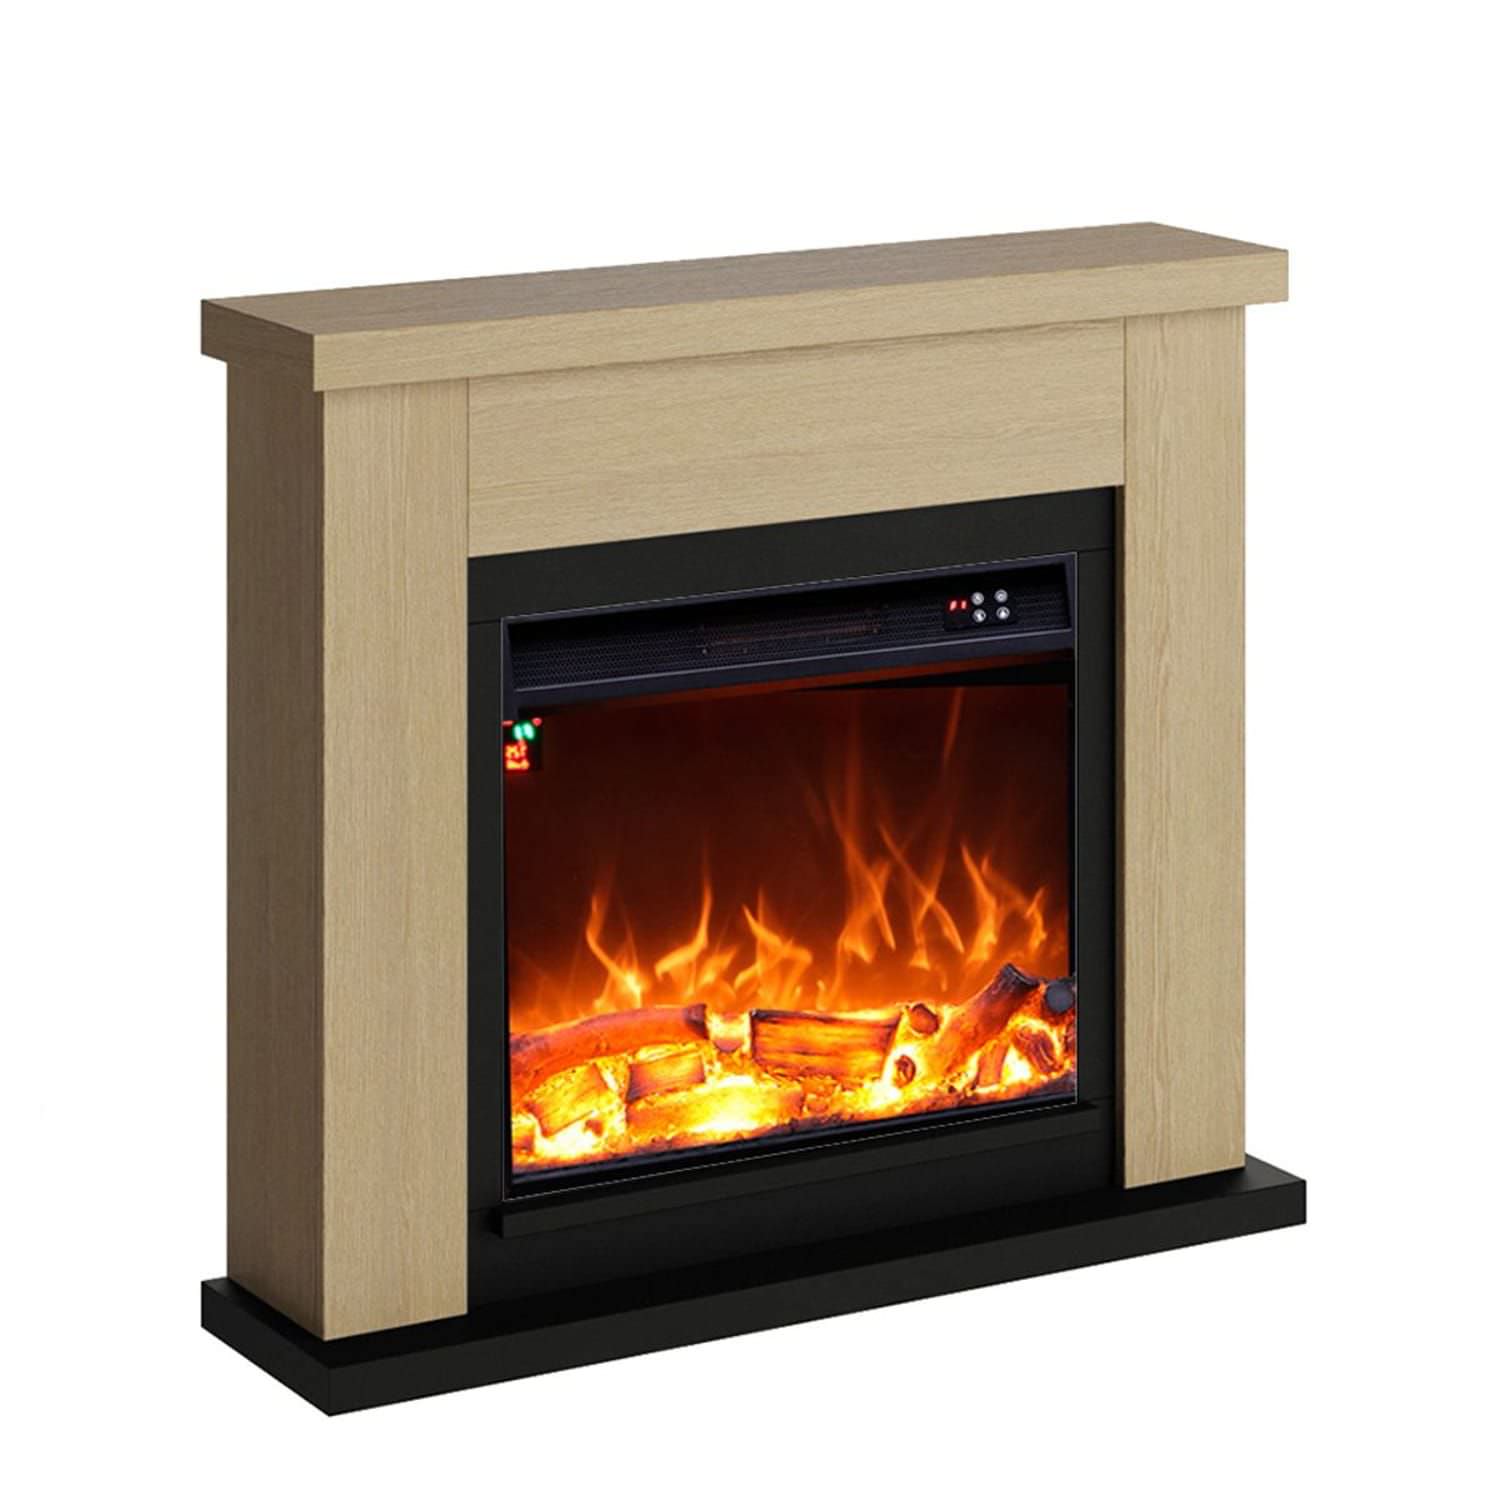 Paolorover Complete Electric Fireplace